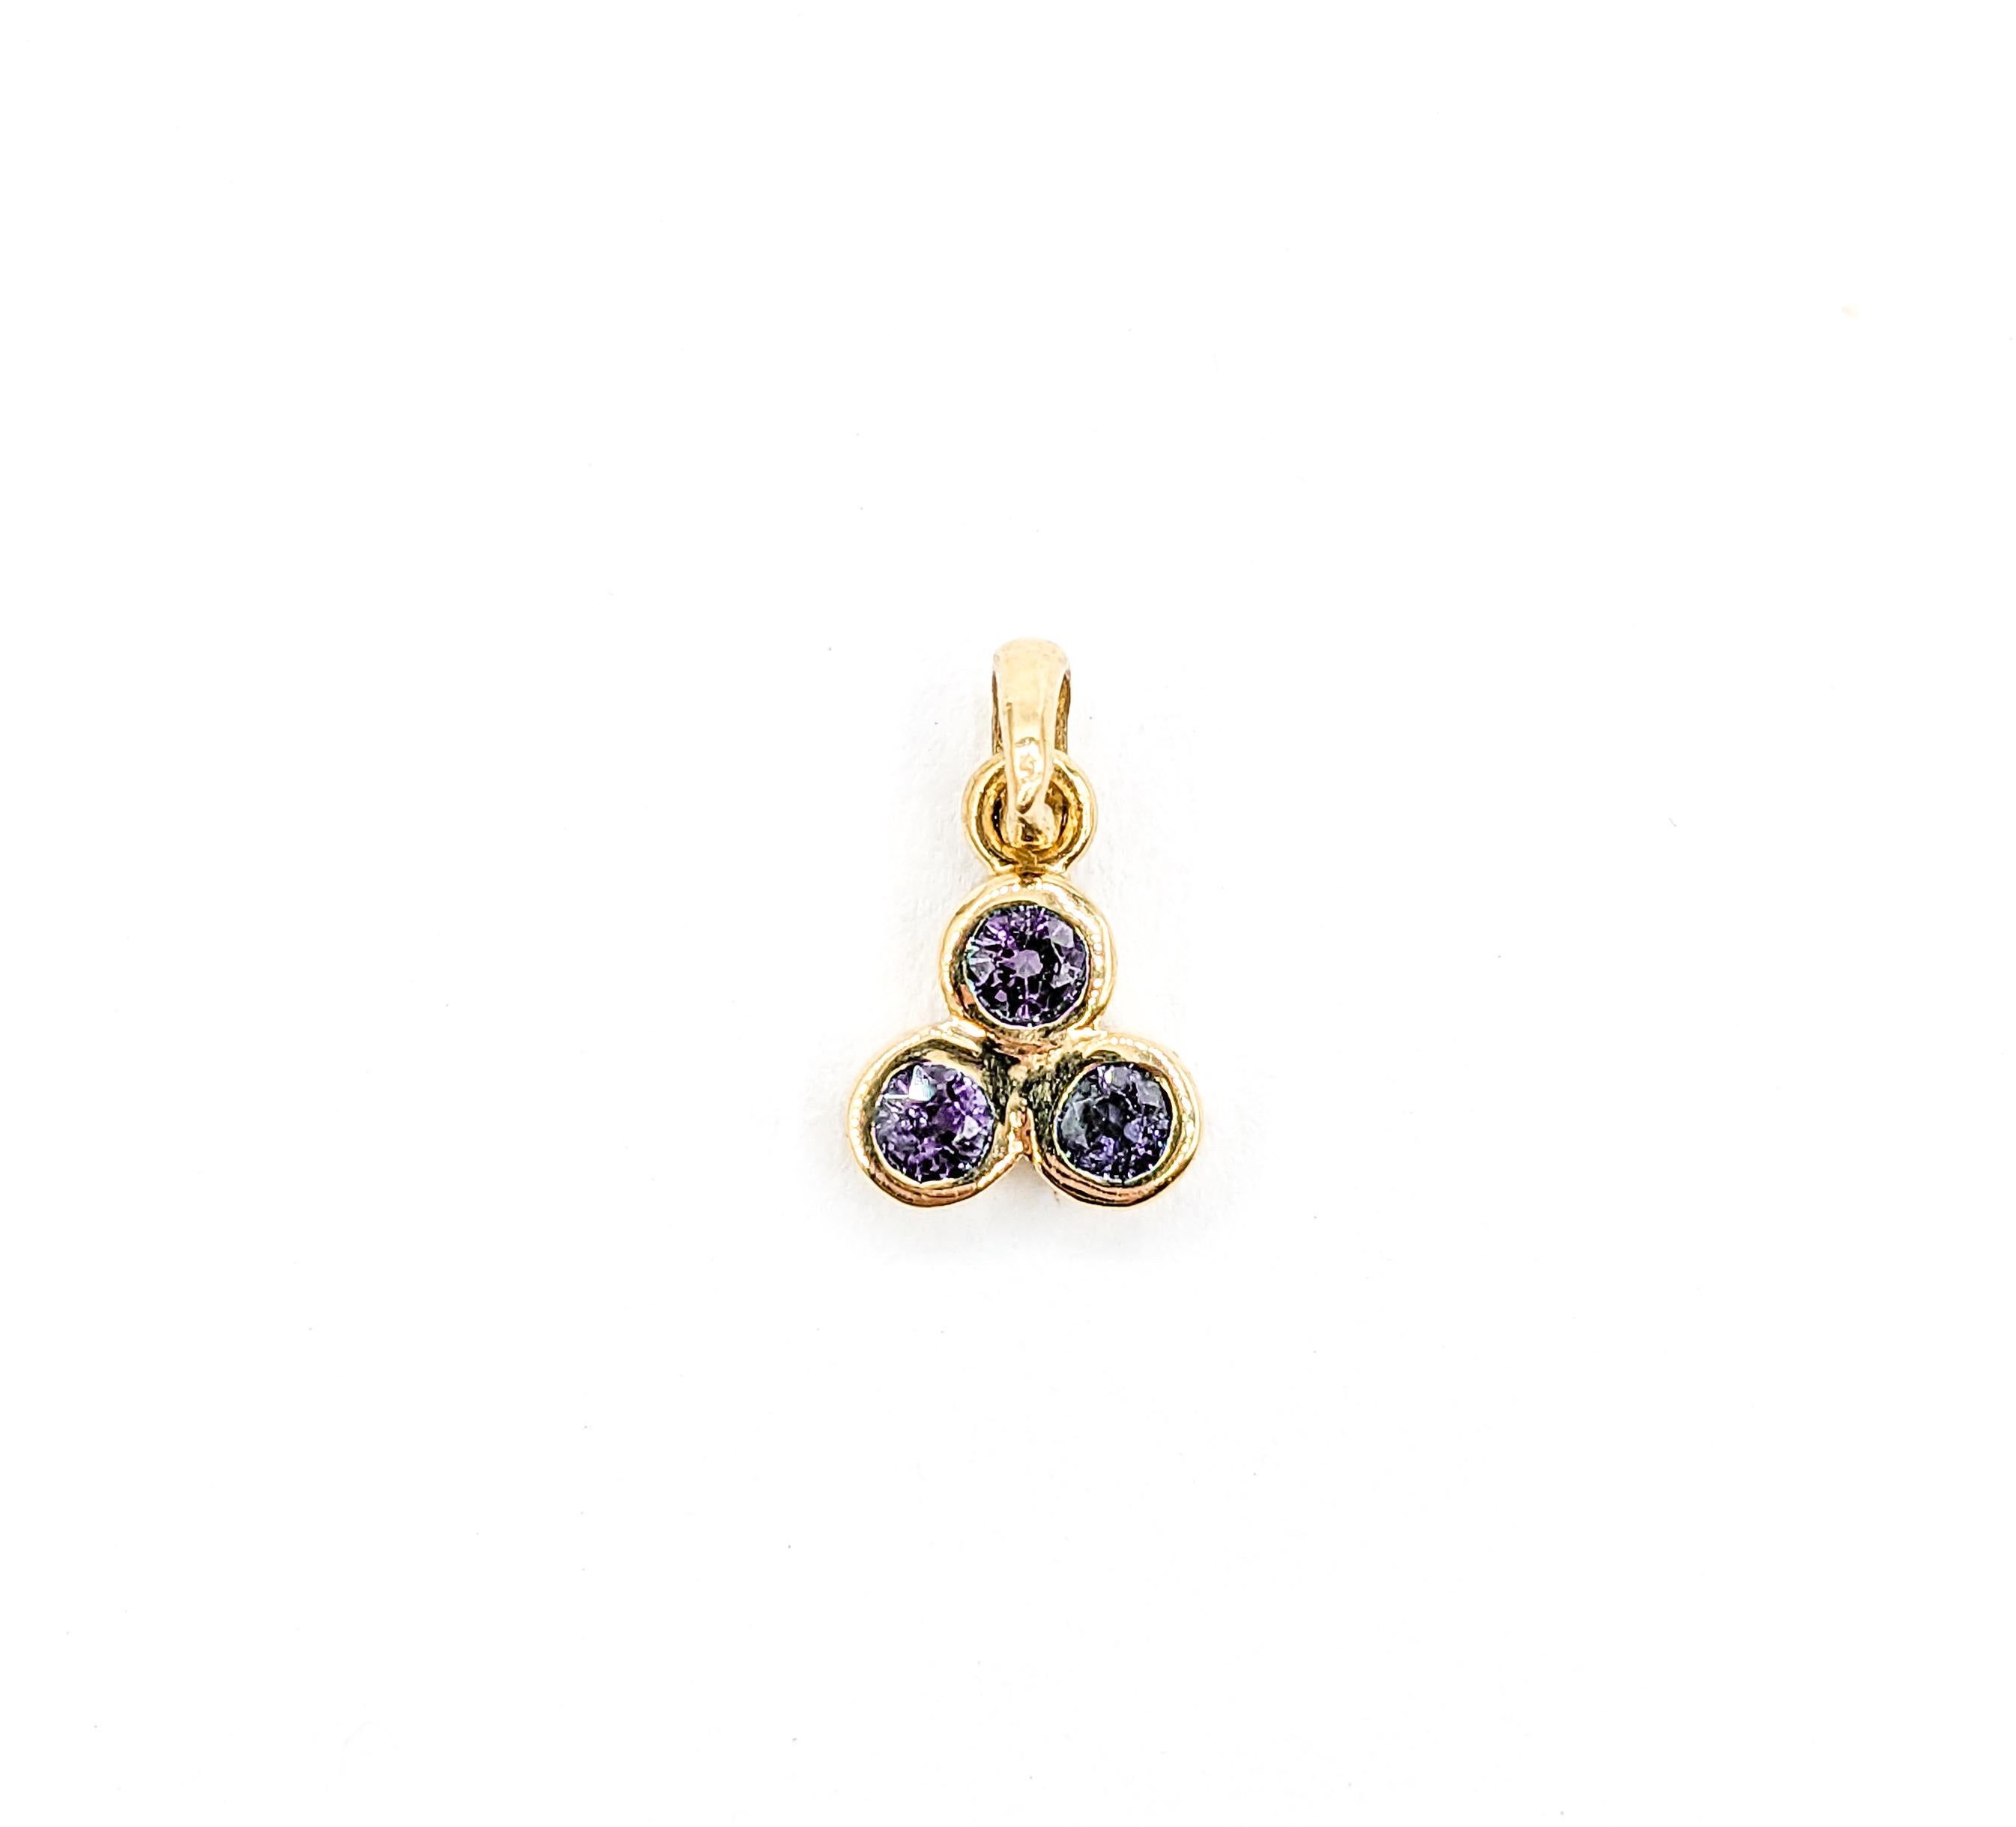 Petite Natural Alexandrite Pendant Charm in Yellow Gold 

Introducing this delicate pendant, a stunning creation in 14k yellow gold. At its heart are three bezel set stones, totaling .20ctw of natural Brazilian Alexandrite, each gem sparkling with a